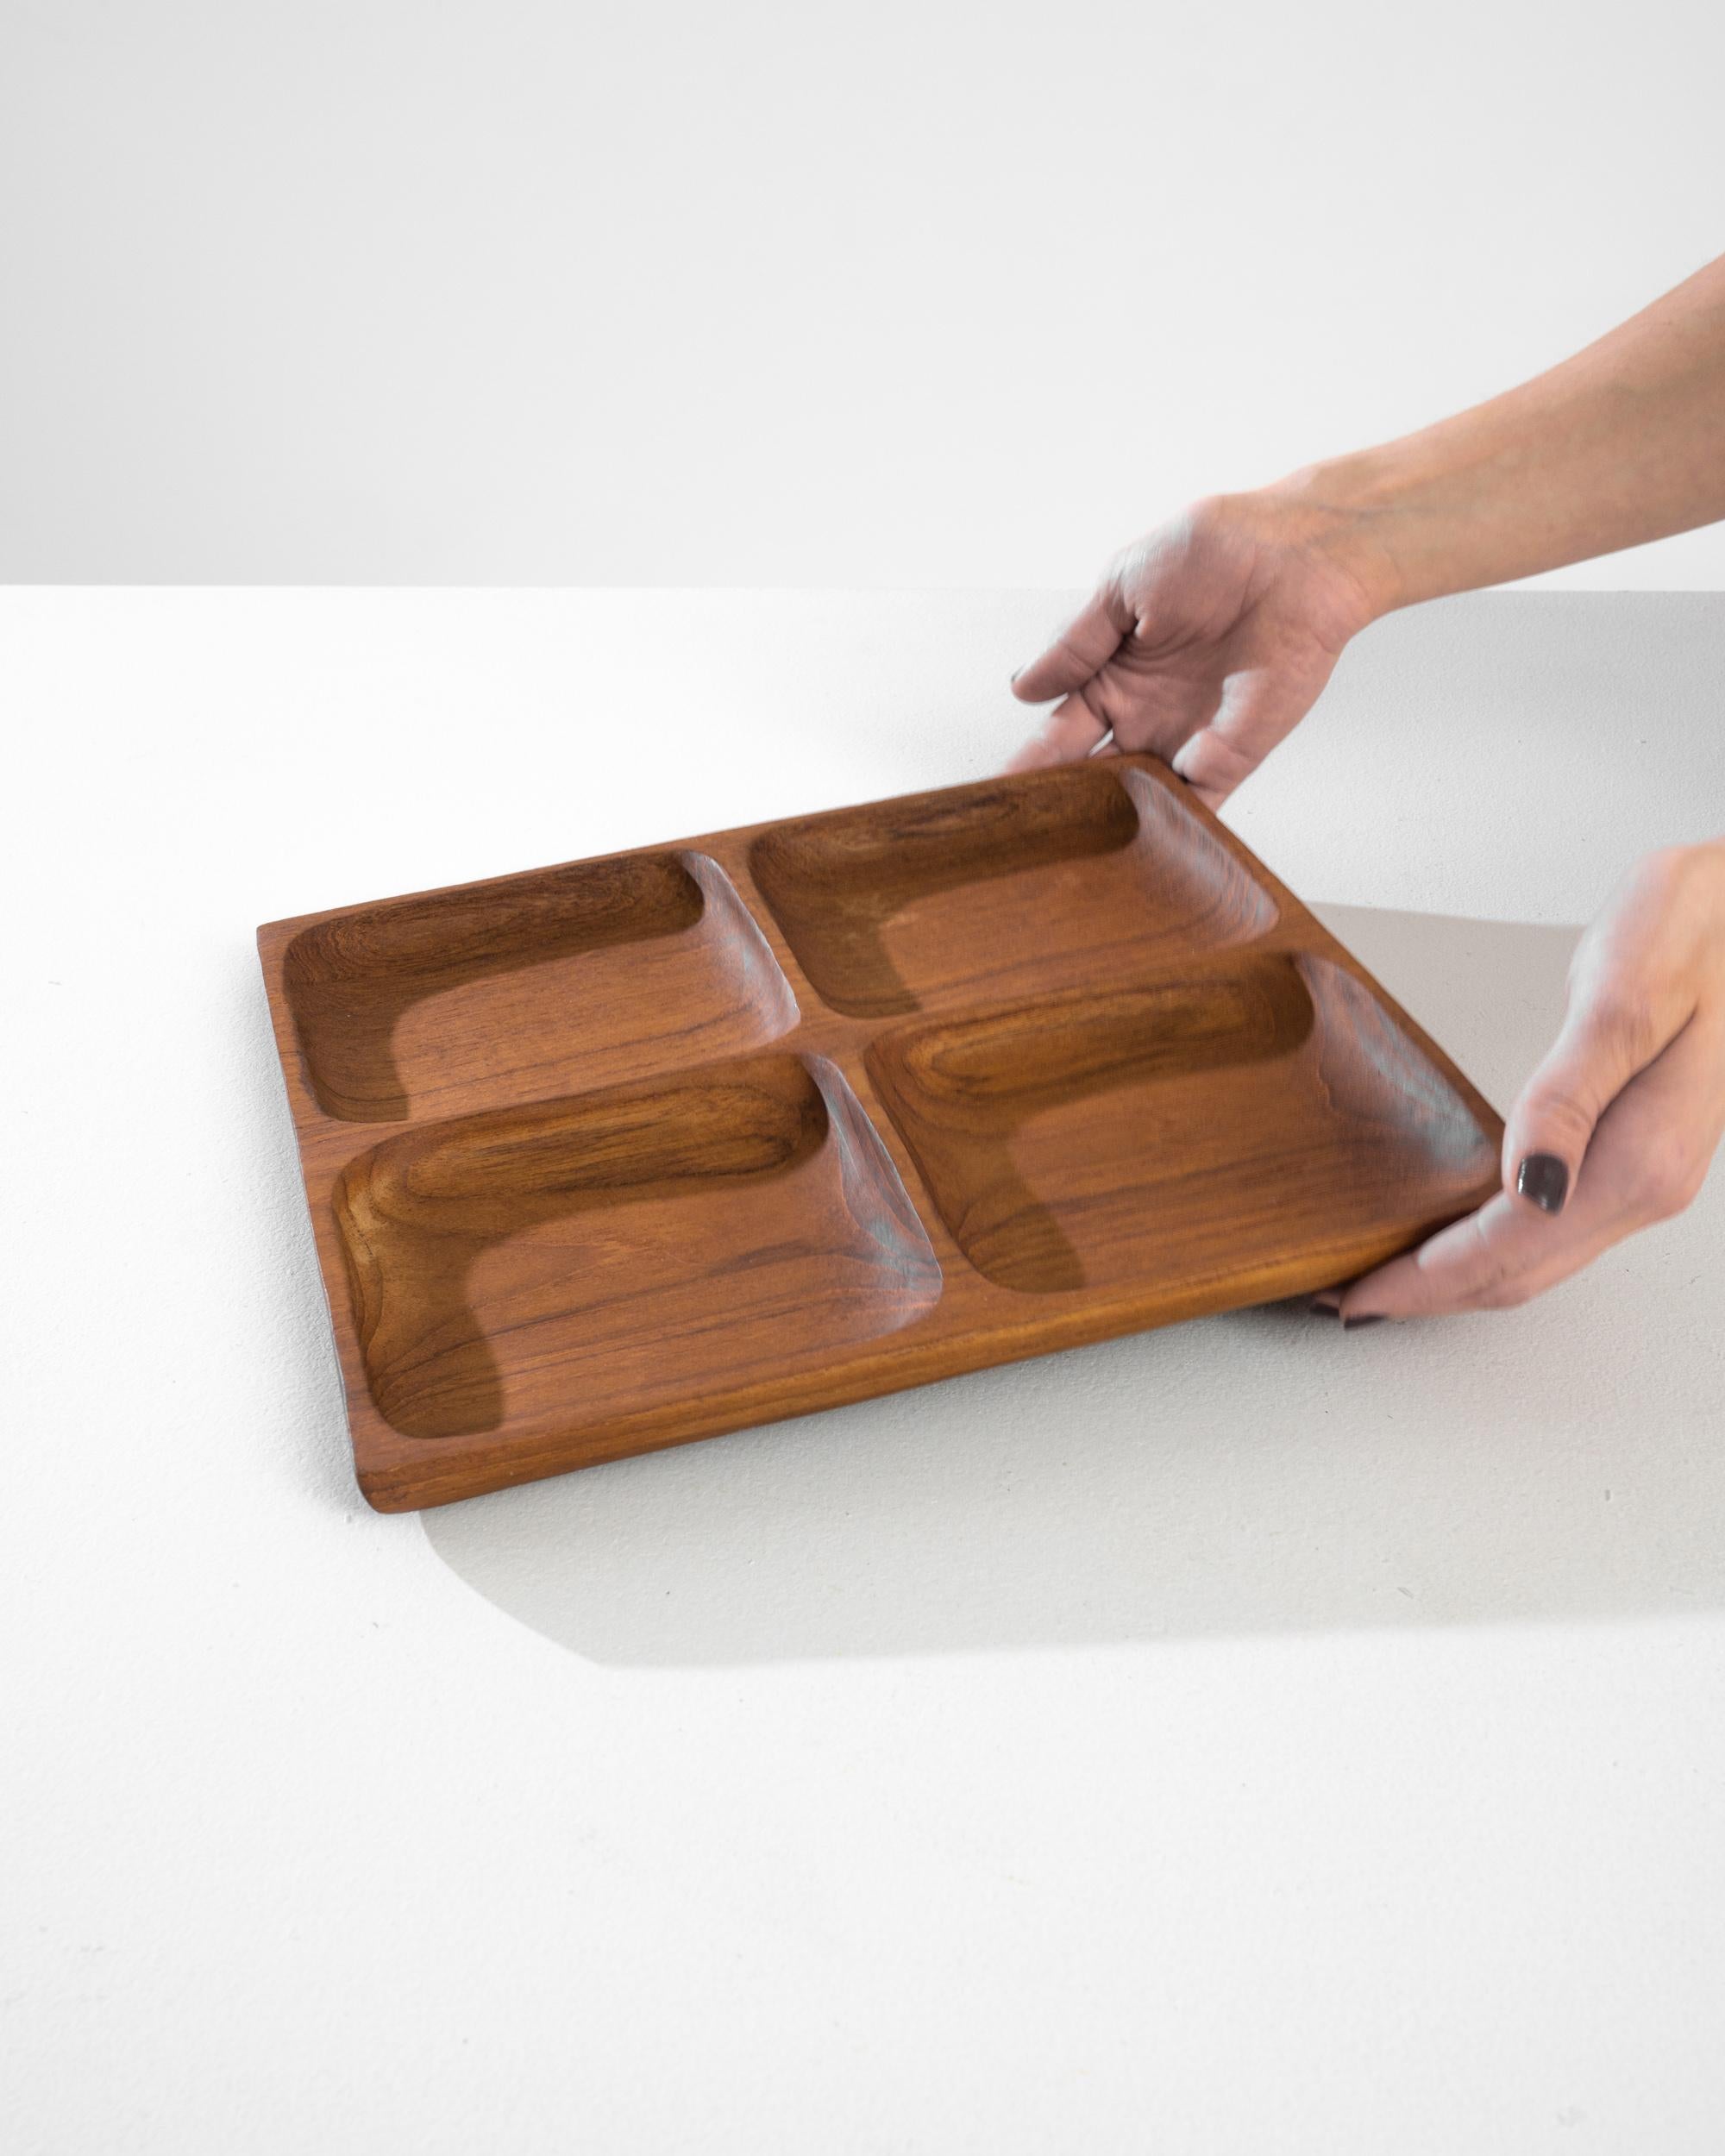 This 1970s Danish teak serving tray exemplifies the timeless elegance of Scandinavian design. Crafted from rich, warmly hued teak wood, it features a simple yet sophisticated four-compartment layout that marries form with function. The smooth,